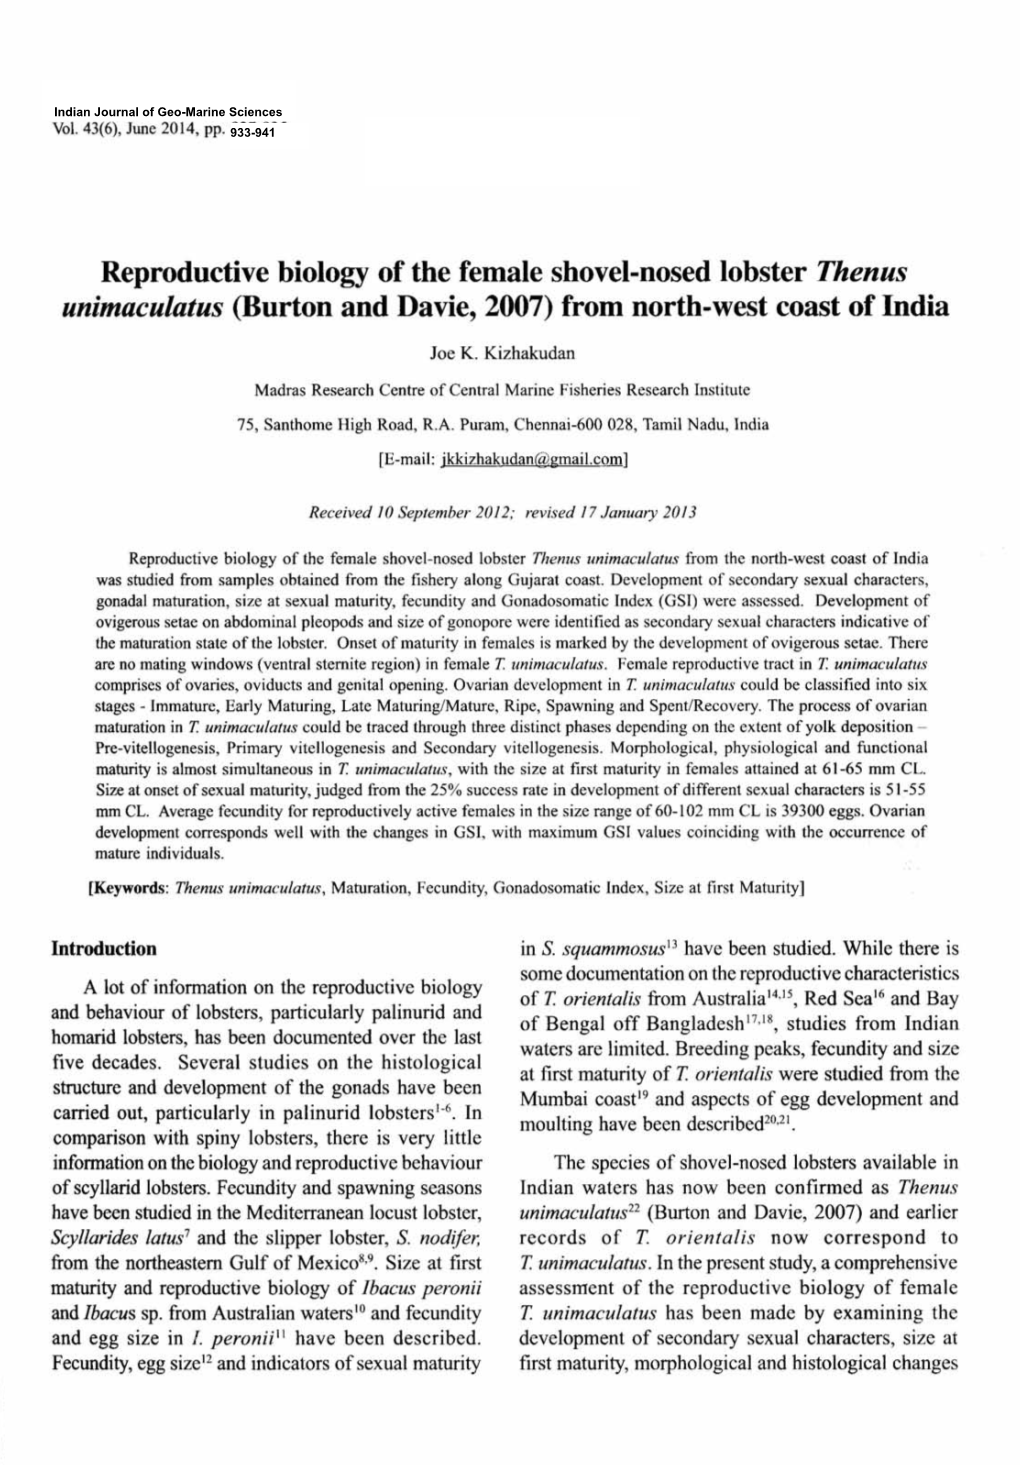 Reproductive Biology of the Female Shovel-Nosed Lobster Thenus Unimaculatus (Burton and Davie, 2007) from North-West Coast of India